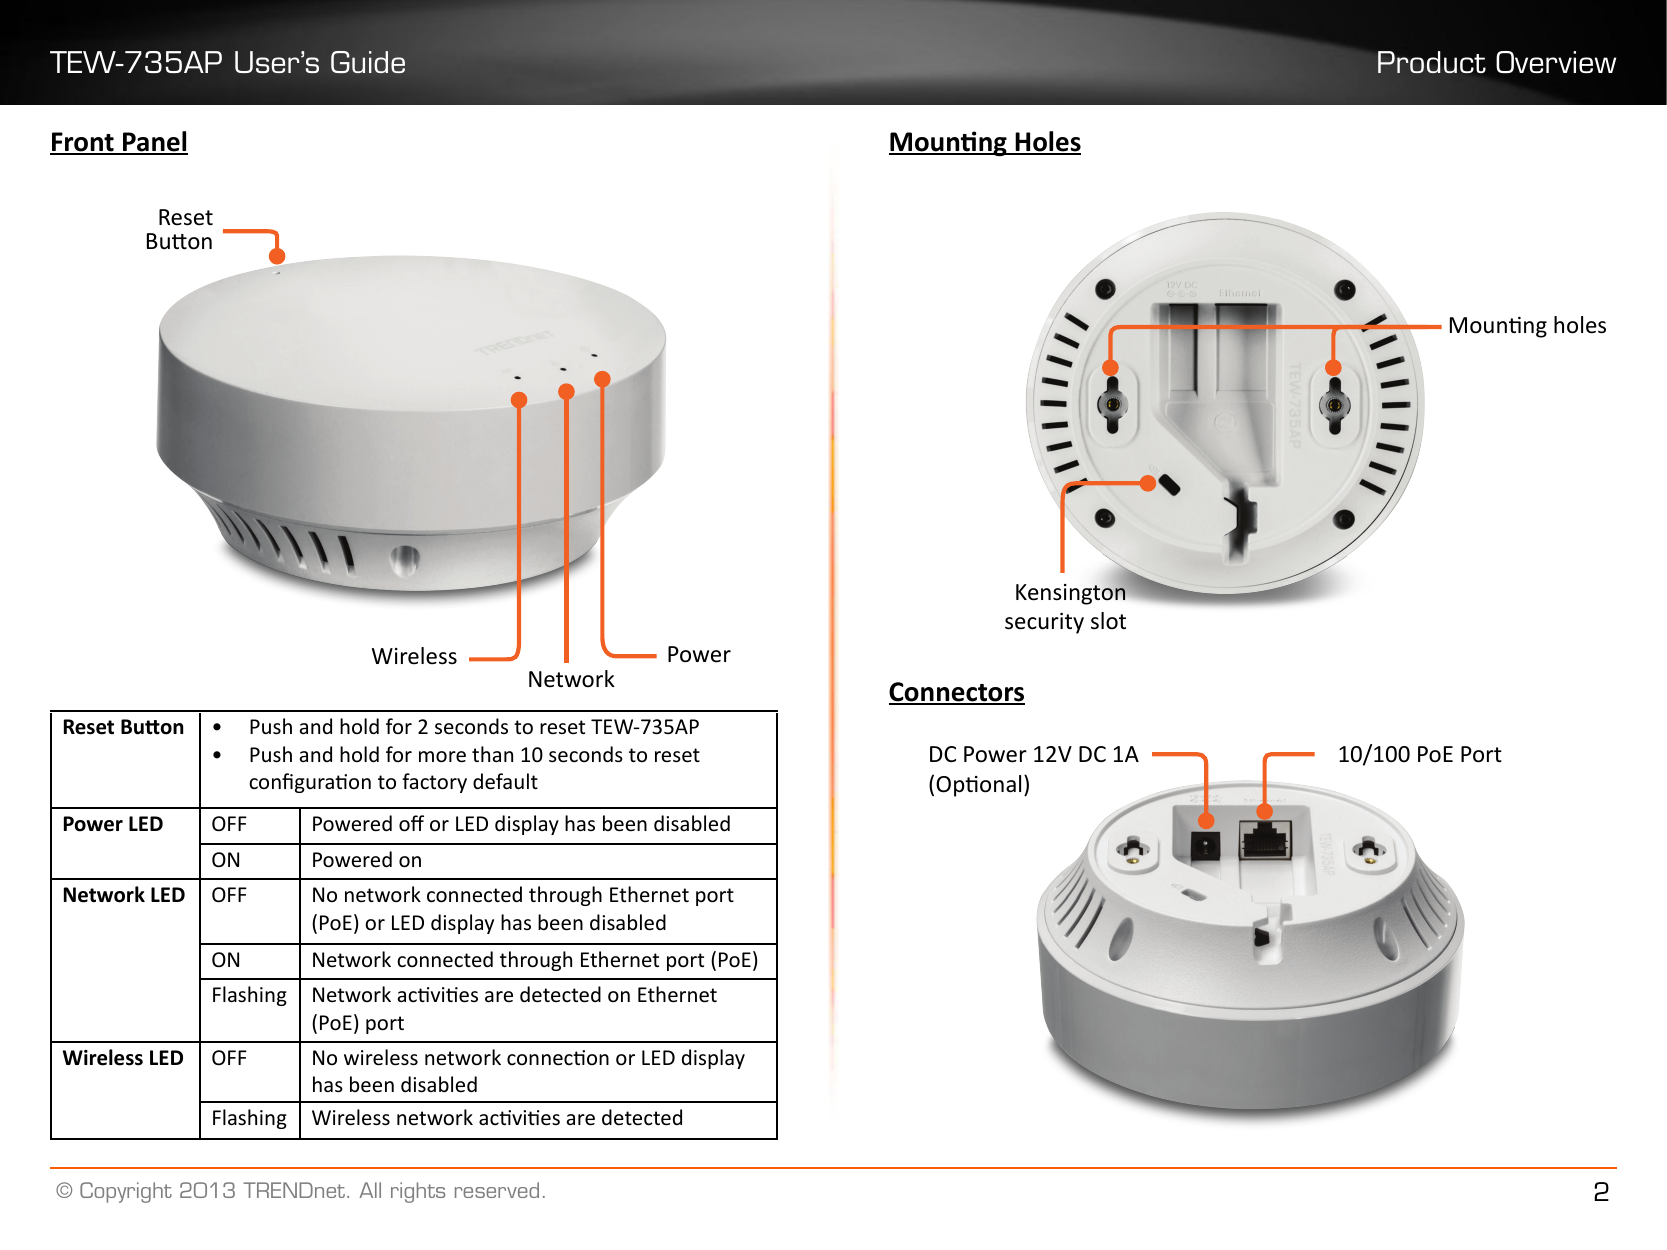 TEW-735AP User’s Guide Product Overview© Copyright 2013 TRENDnet. All rights reserved. 2Front PanelWirelessNetworkPowerMounng HolesConnectorsDC Power 12V DC 1A(Oponal)10/100 PoE PortMounng holesKensington security slotResetBuonReset Buon •  Push and hold for 2 seconds to reset TEW-735AP•  Push and hold for more than 10 seconds to reset conguraon to factory default Power LED OFF Powered o or LED display has been disabledON Powered onNetwork LED OFF No network connected through Ethernet port (PoE) or LED display has been disabledON Network connected through Ethernet port (PoE)Flashing Network acvies are detected on Ethernet (PoE) portWireless LED OFF No wireless network connecon or LED display has been disabledFlashing Wireless network acvies are detected